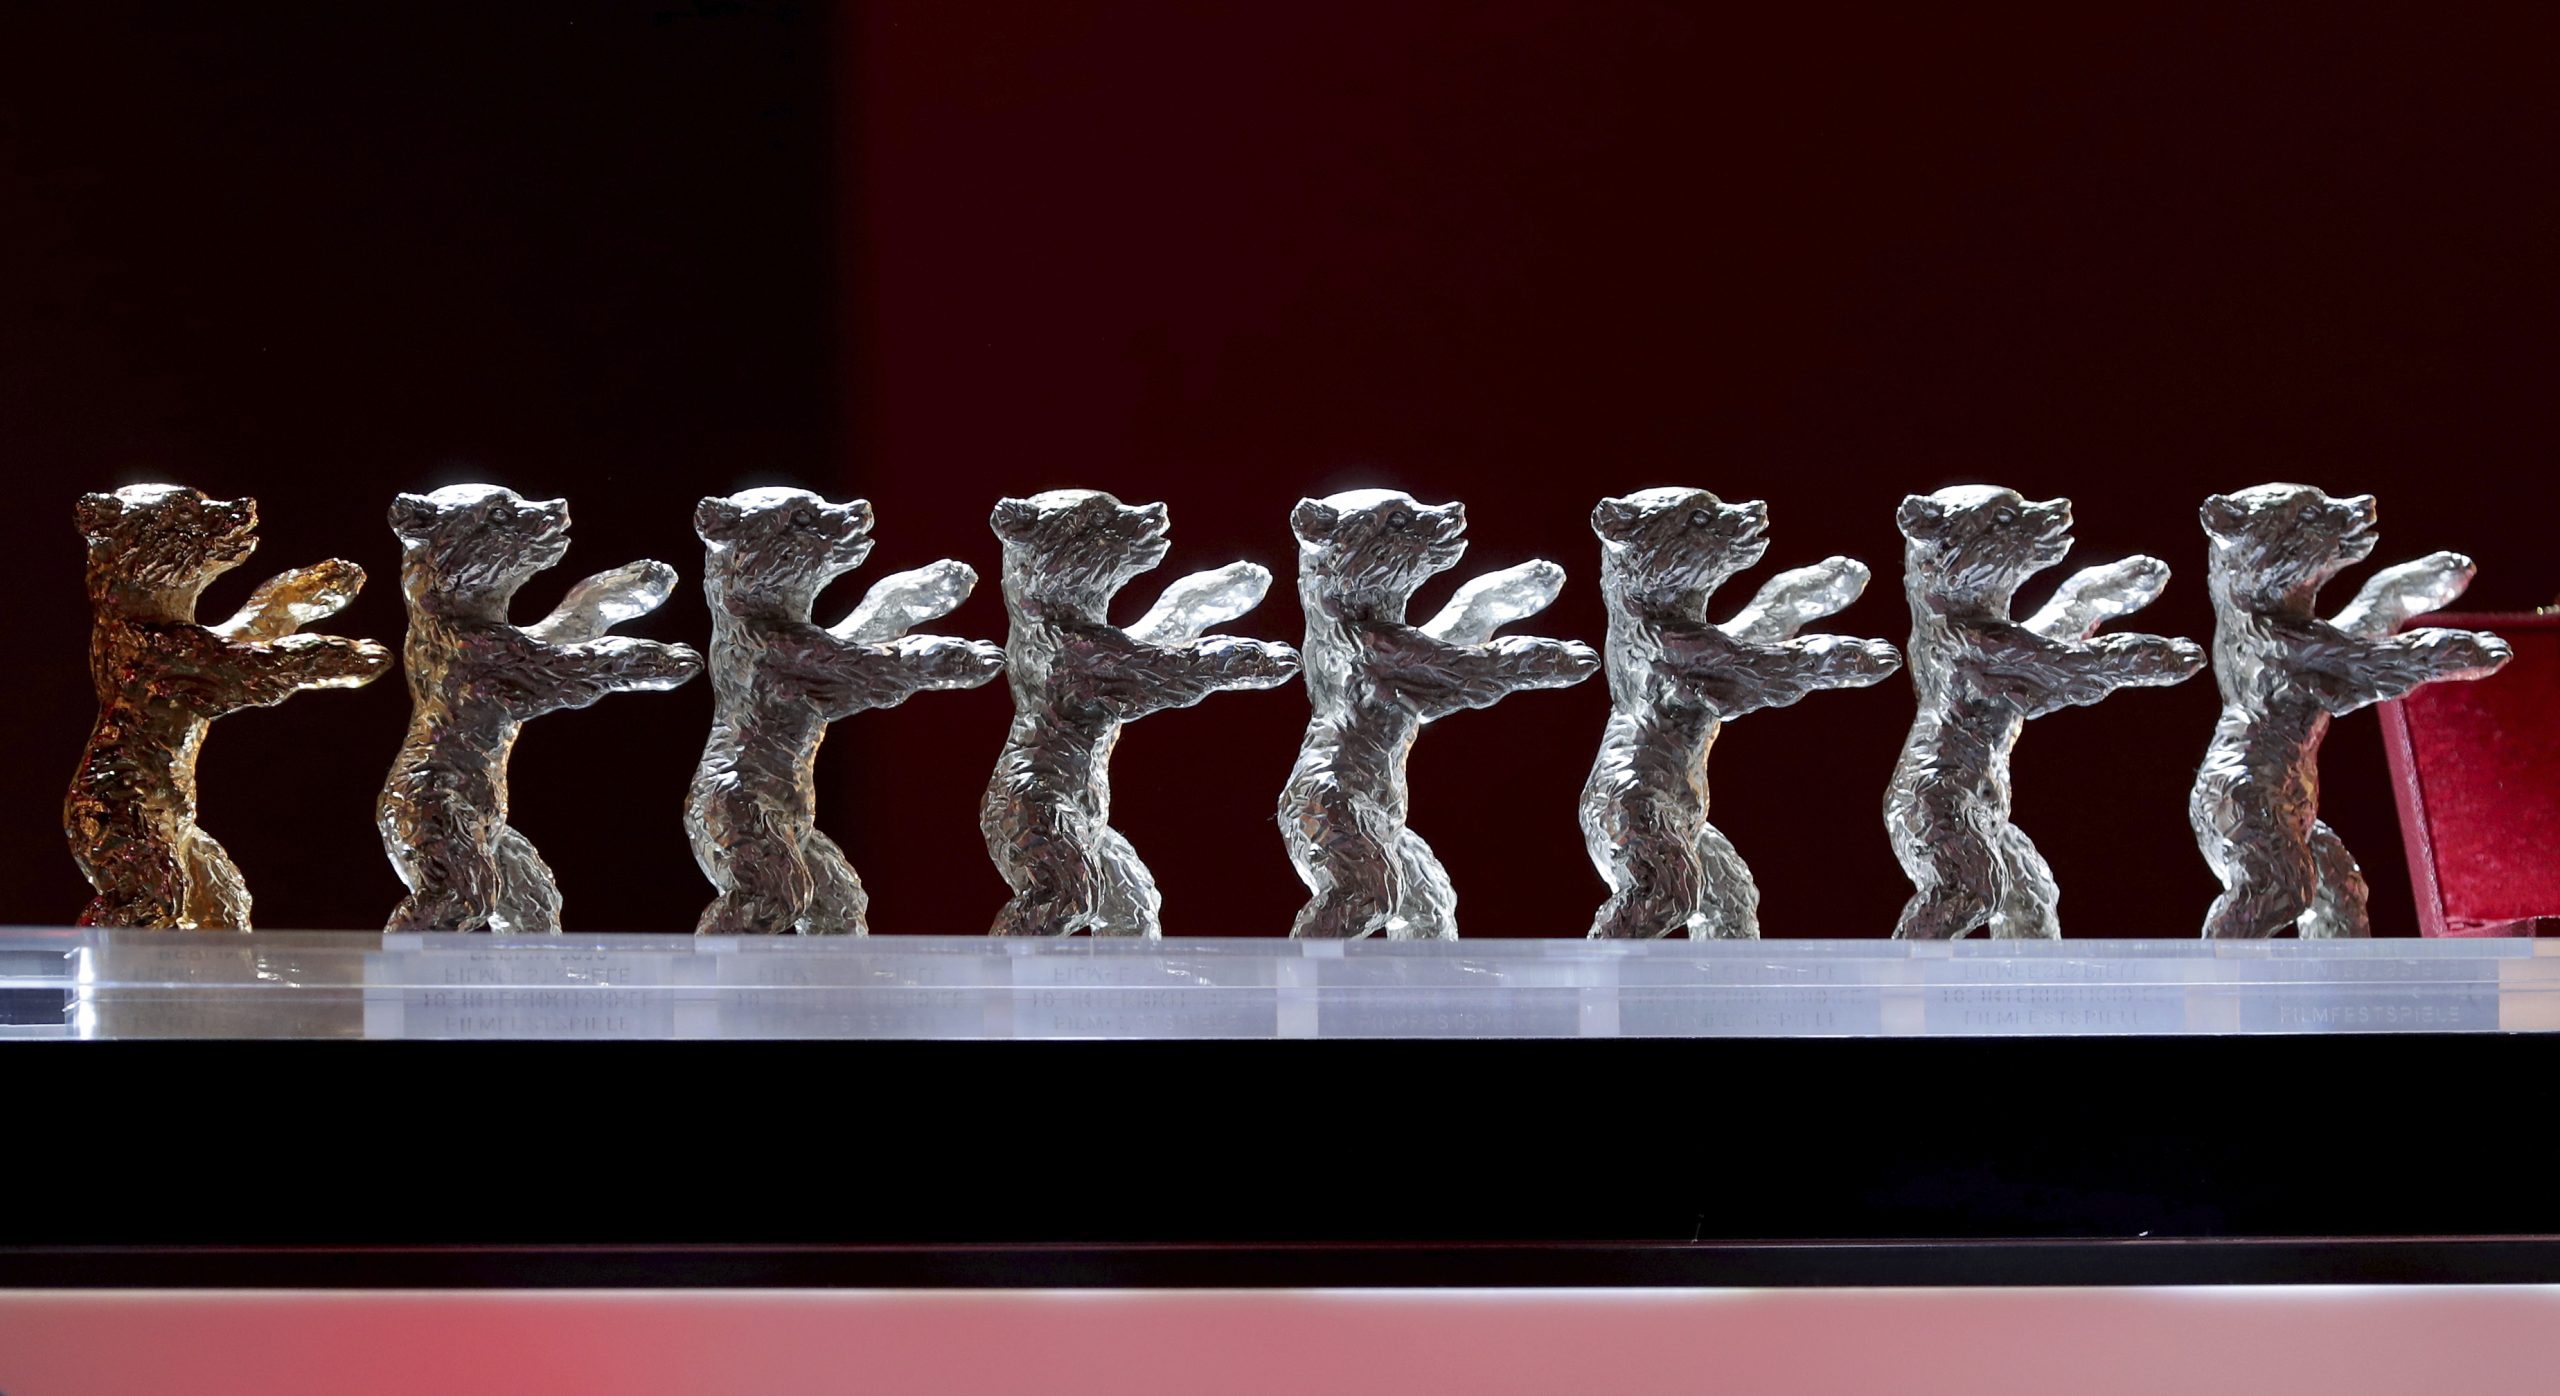 FILE - The Baeren (Bears) awards are lined up during the award ceremony for the 2020 Berlinale Film Festival in Berlin, Germany, on Feb. 29, 2020. Organizers say the annual Berlin International Film Festival is being put off this year due to the coronavirus pandemic and split into two parts later in 2021. (AP Photo/Michael Sohn, File)